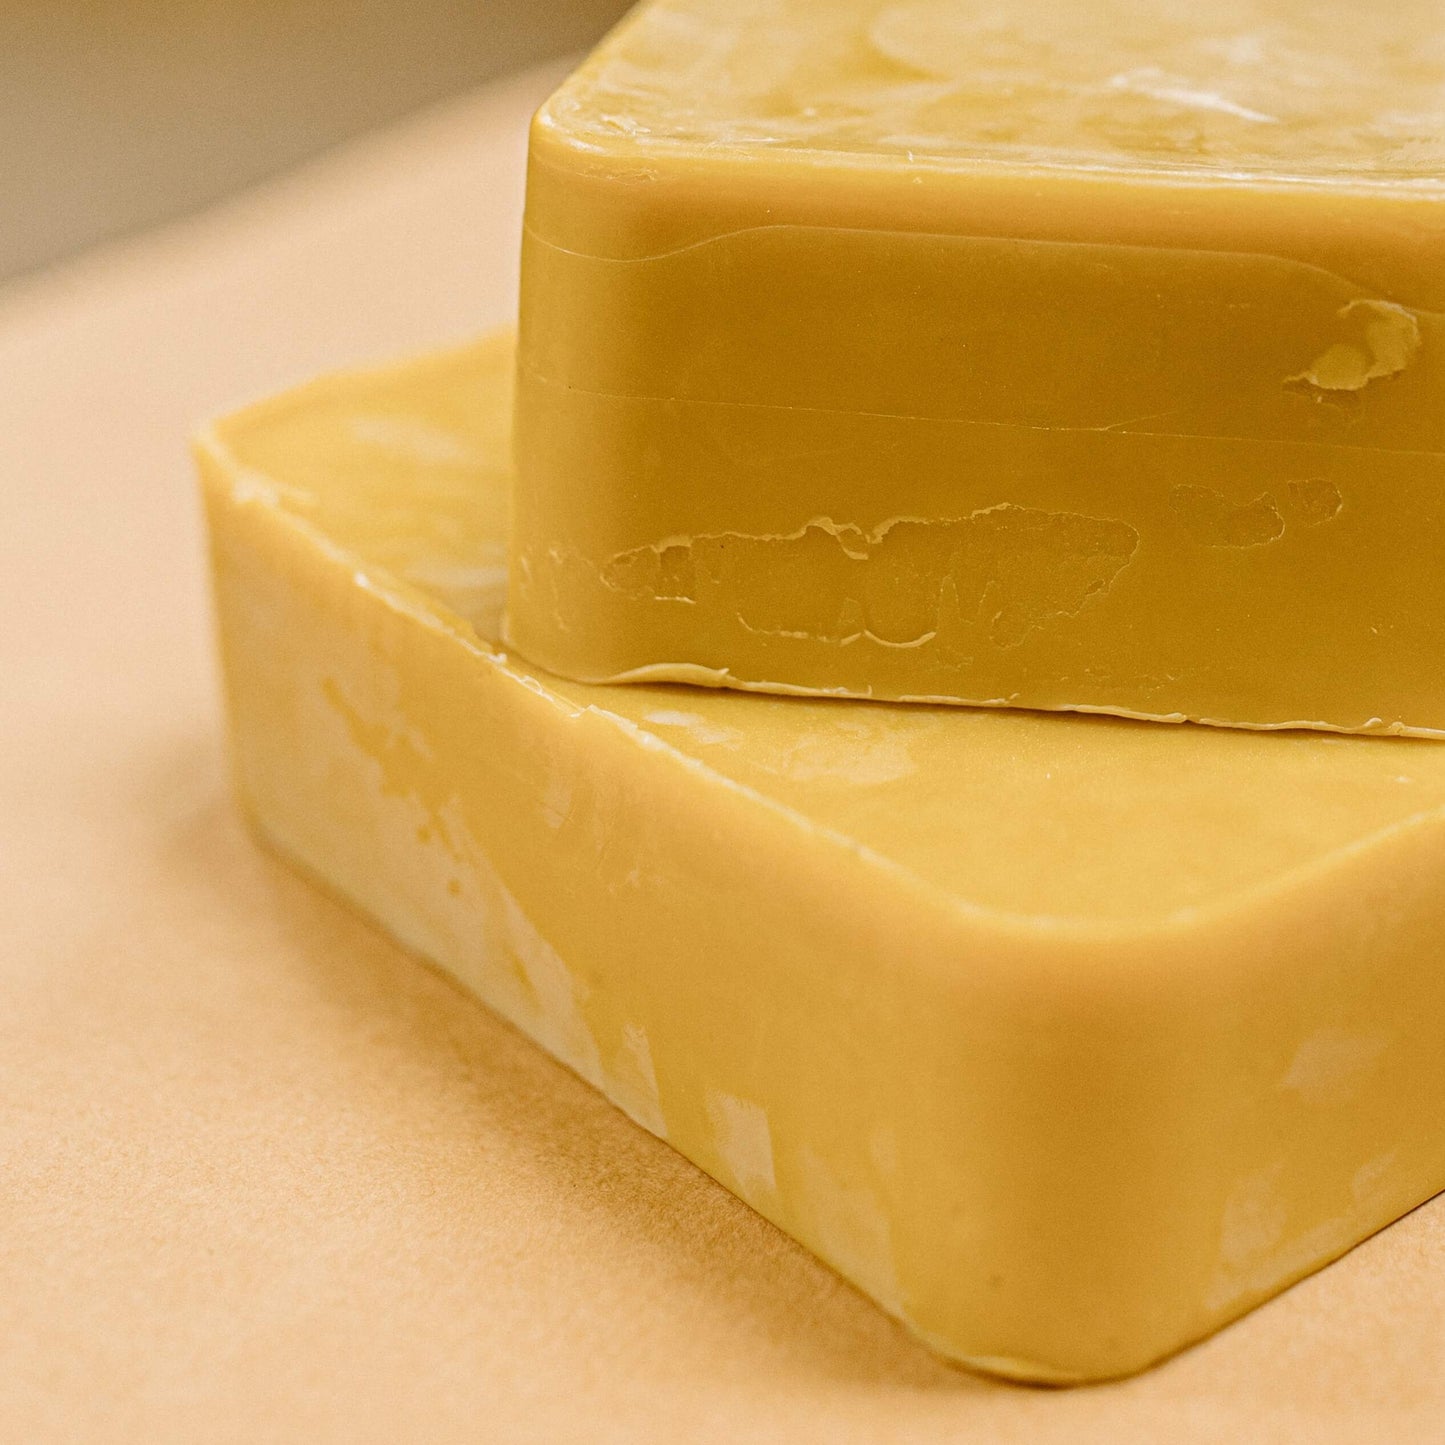 An example of an order of bulk yellow beeswax, with two blocks stacked on top of each other.